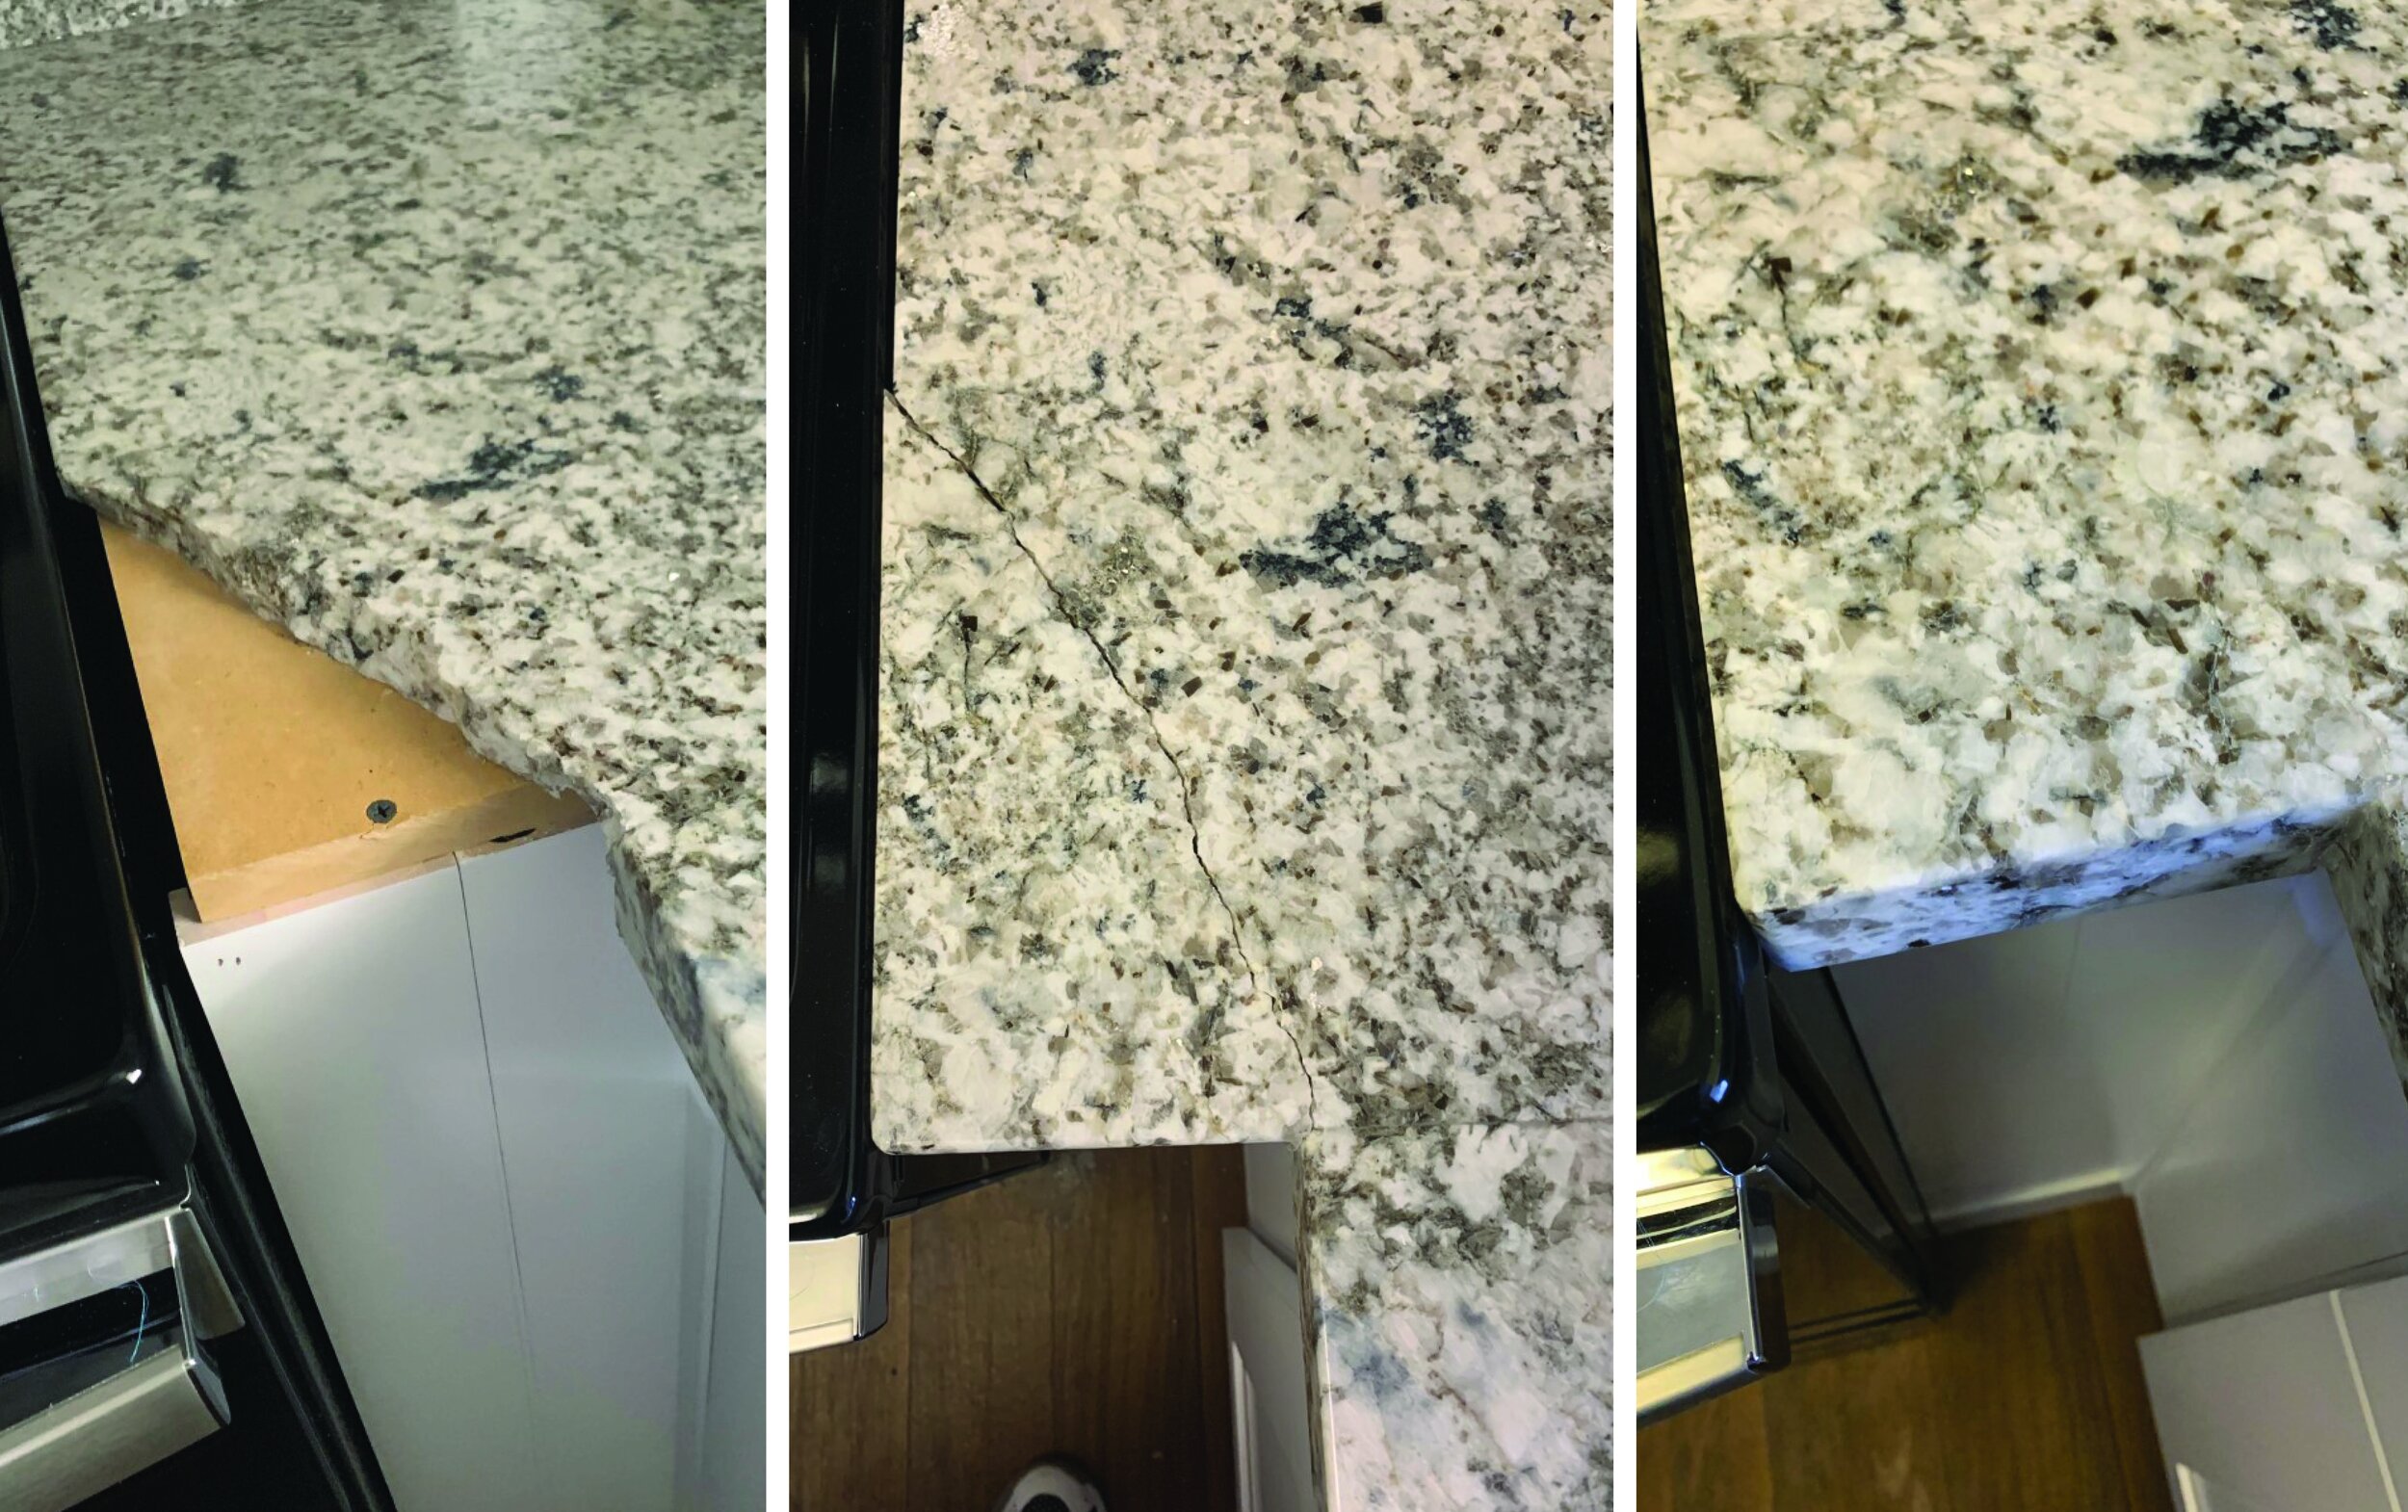   Cracked, broken, or scratched granite countertops are no longer a problem with our granite repair division.  